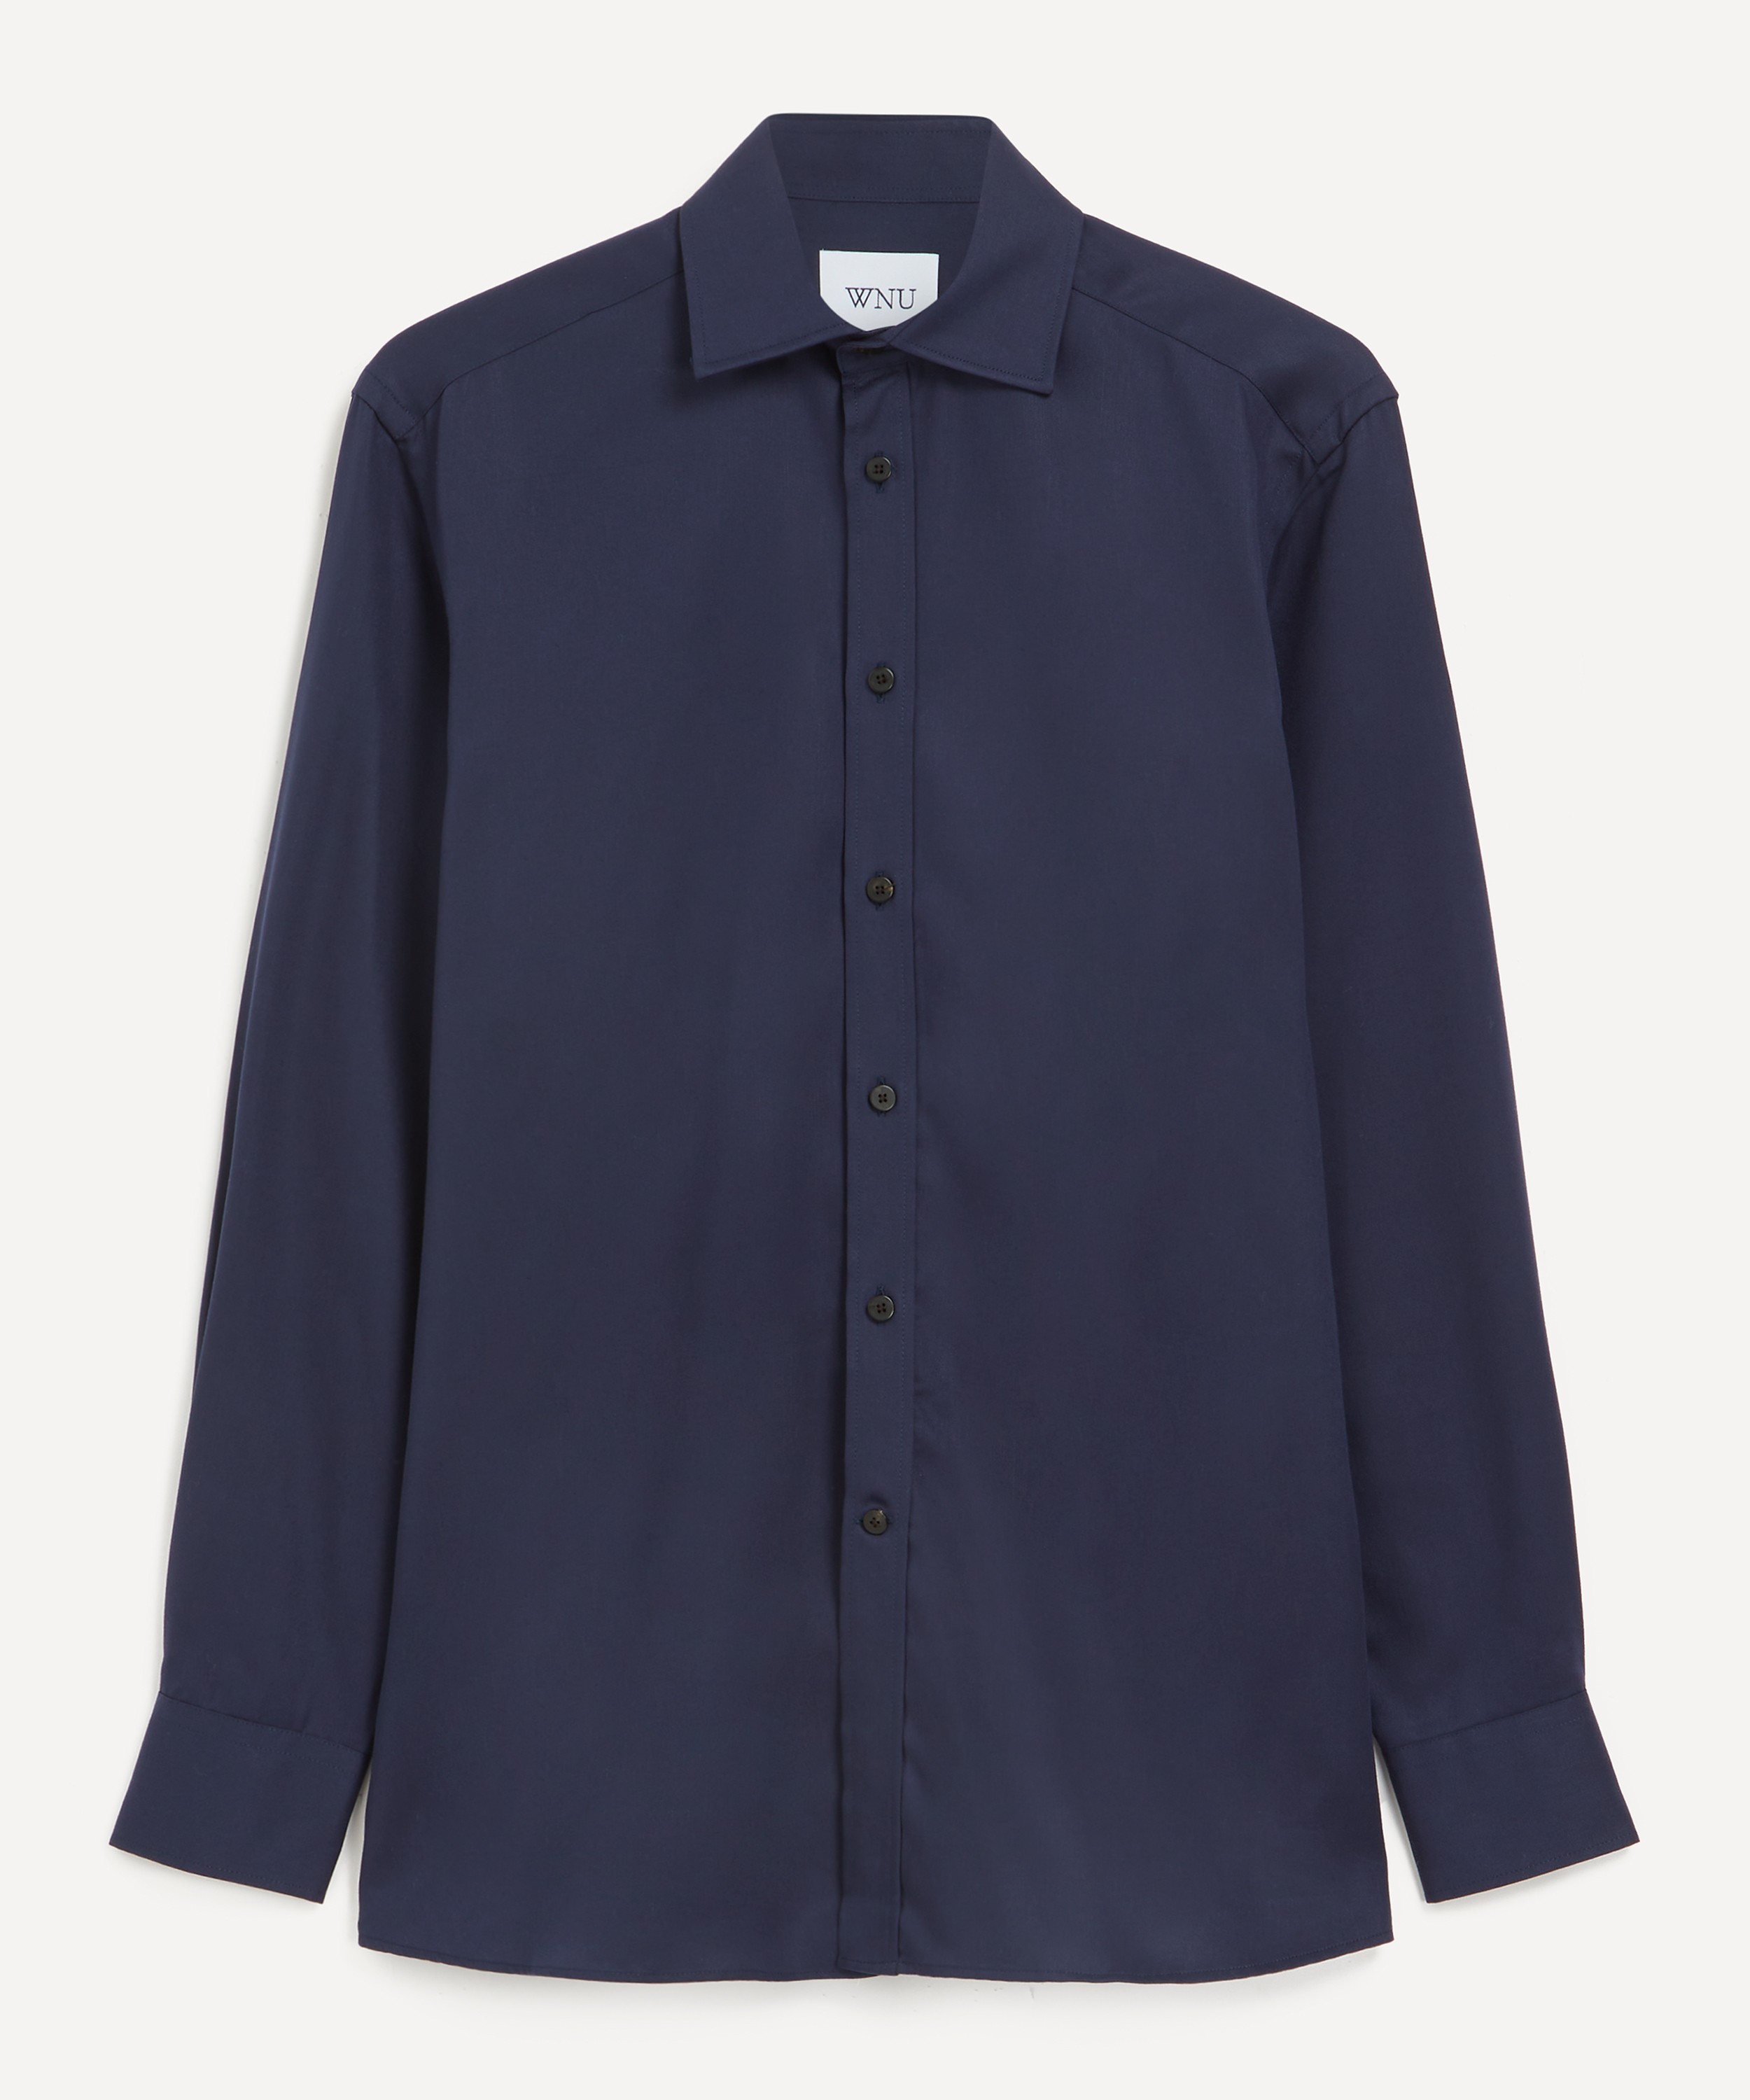 With Nothing Underneath - The Boyfriend Tencel Shirt image number 0